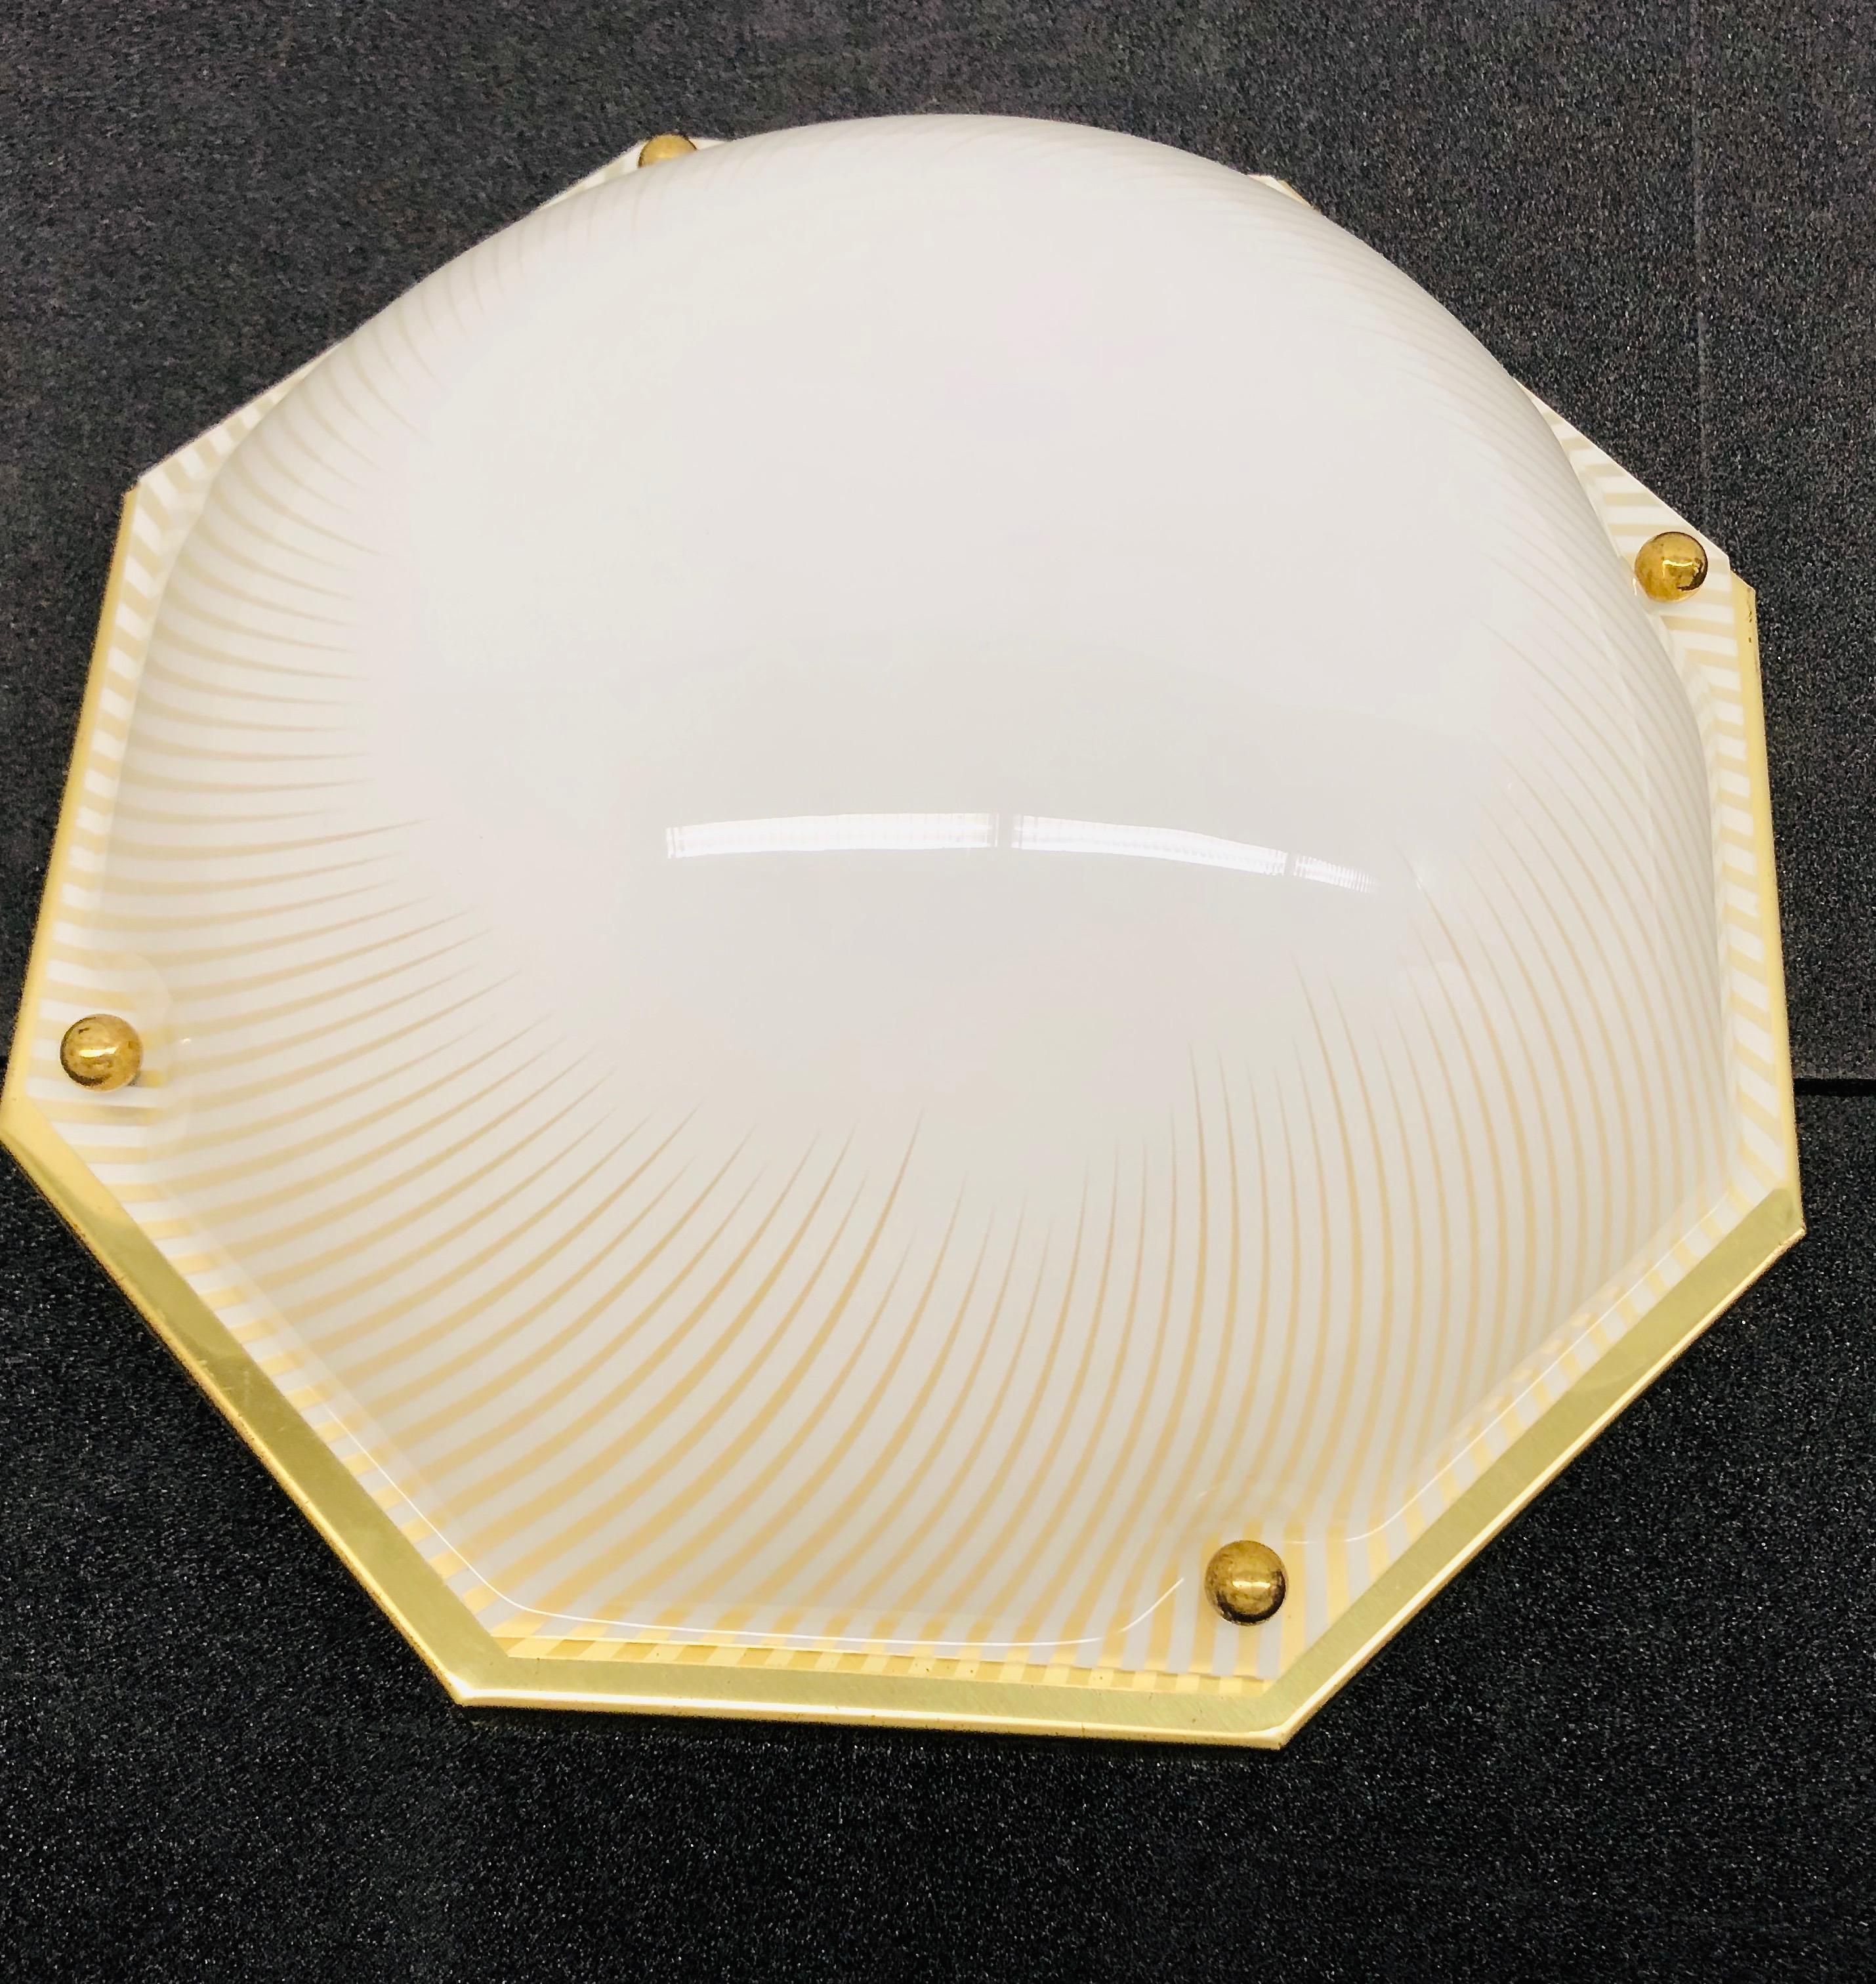 A stunning large Lucite glass flush mount by Zicoli Leuchten, Limbach Germany. It has a nice Lucite glass on a brass frame. The Fixture requires two European E27 / 110 volt Edison bulbs, each bulb up to 60 watts.